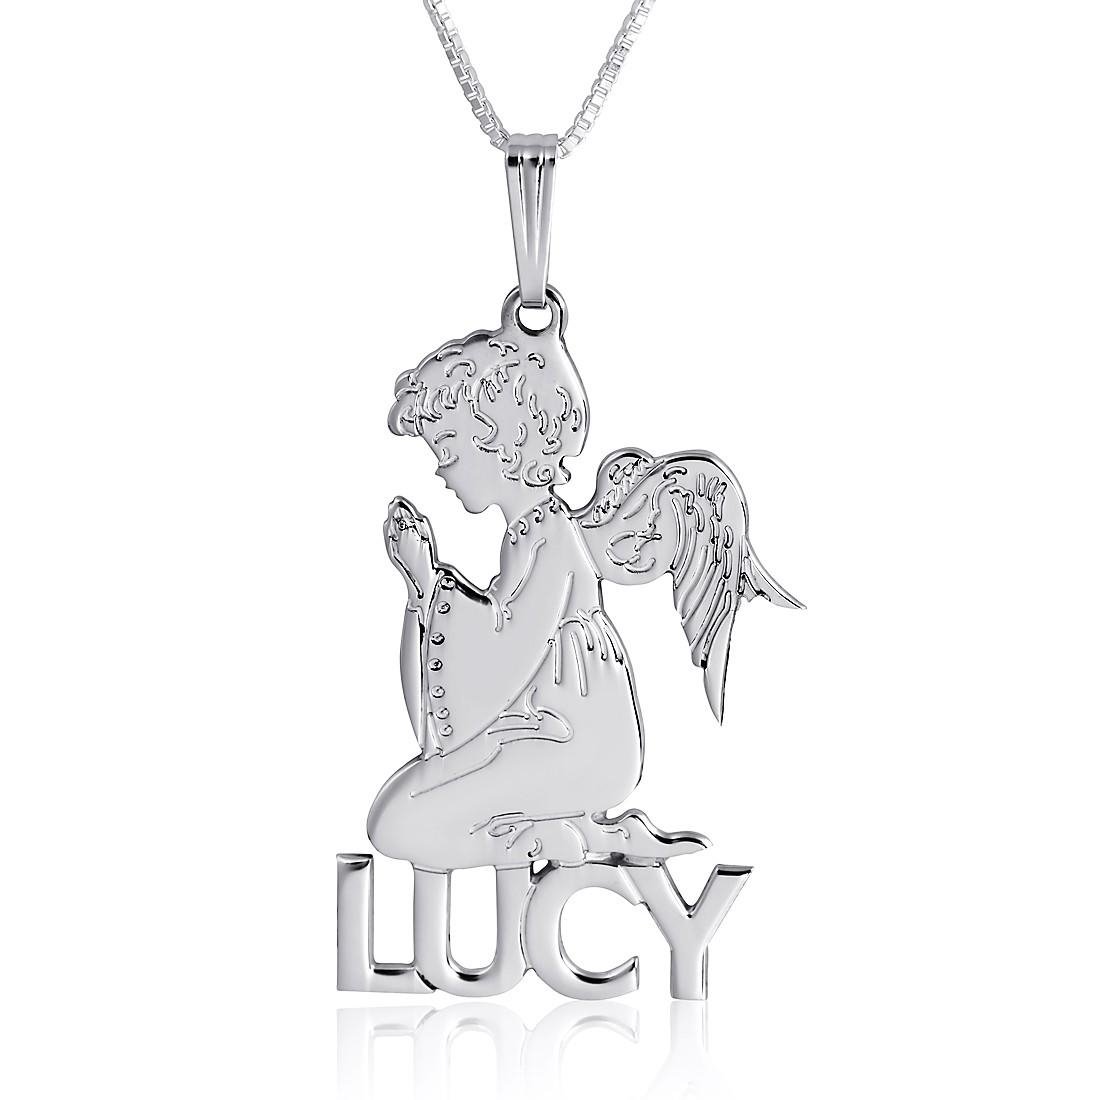 Woman's Sterling Silver Round Guardian Angel Necklace with Chain Options +  18